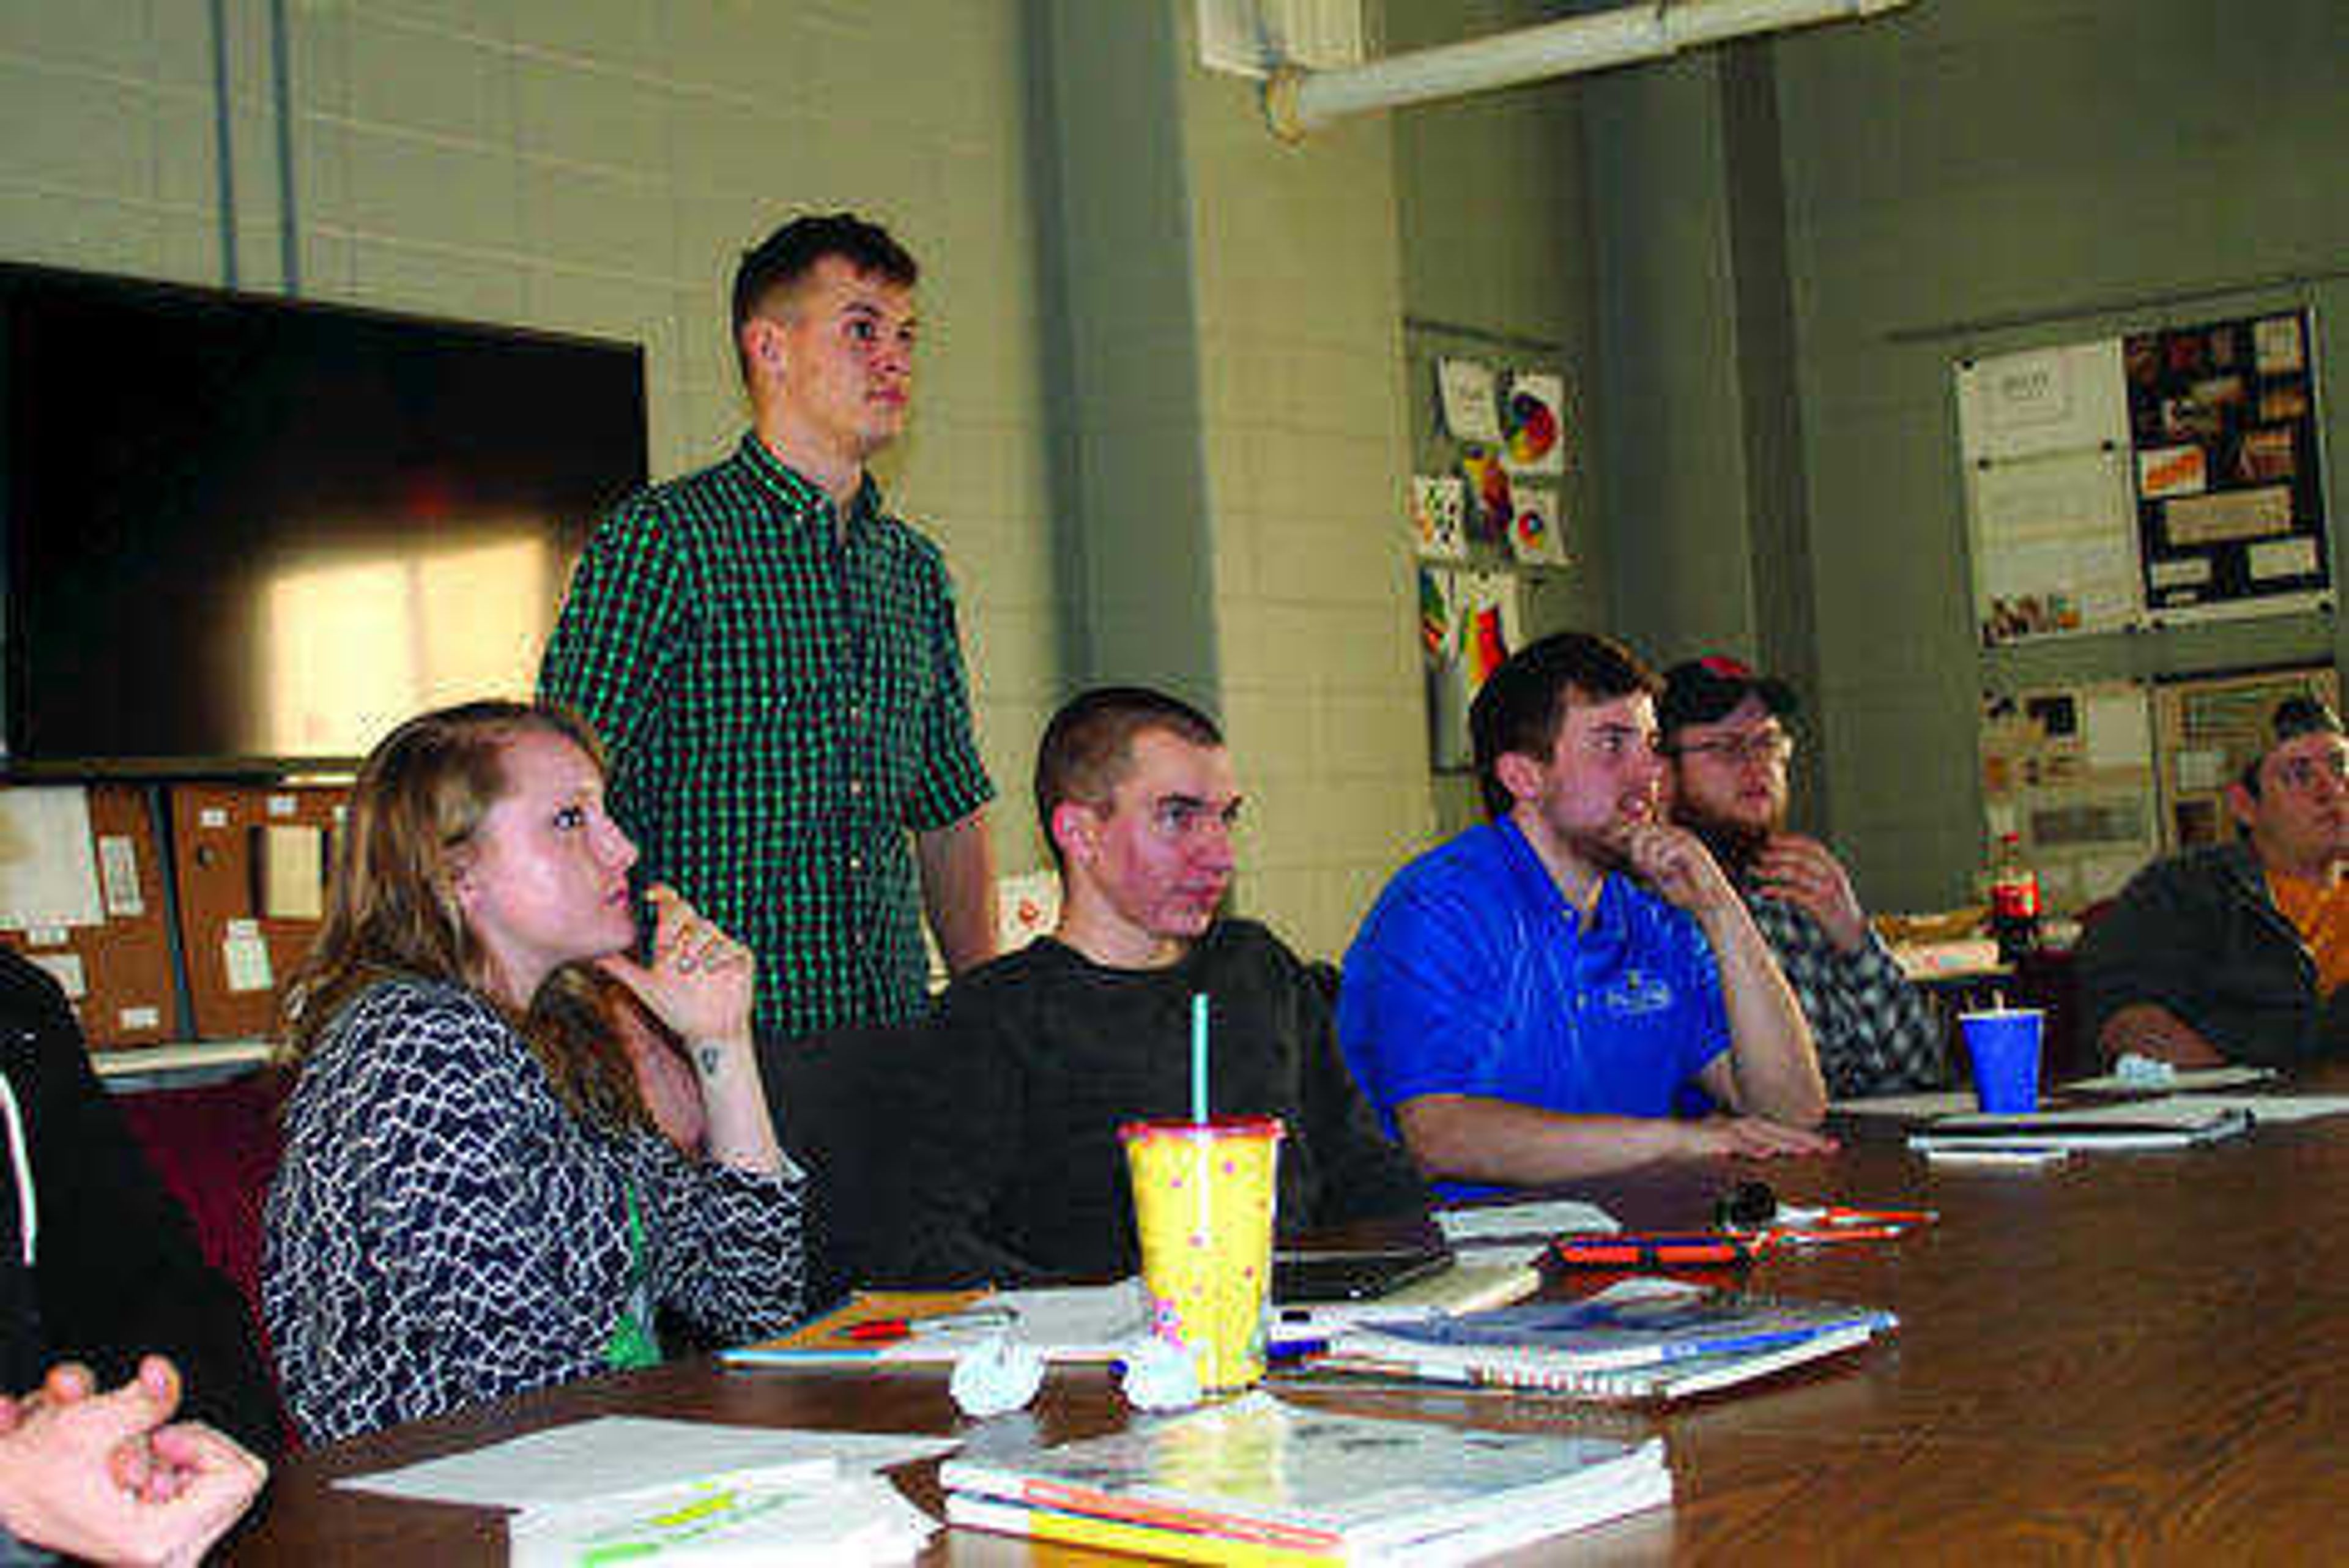 Southeast students (left to right) Elaina Mensinger, Tucker Clements, Michael Oldani, James Grosch and Ian Walker listen in on a meeting for the Sustainable Student Organization. Photo by Karley McDaniel